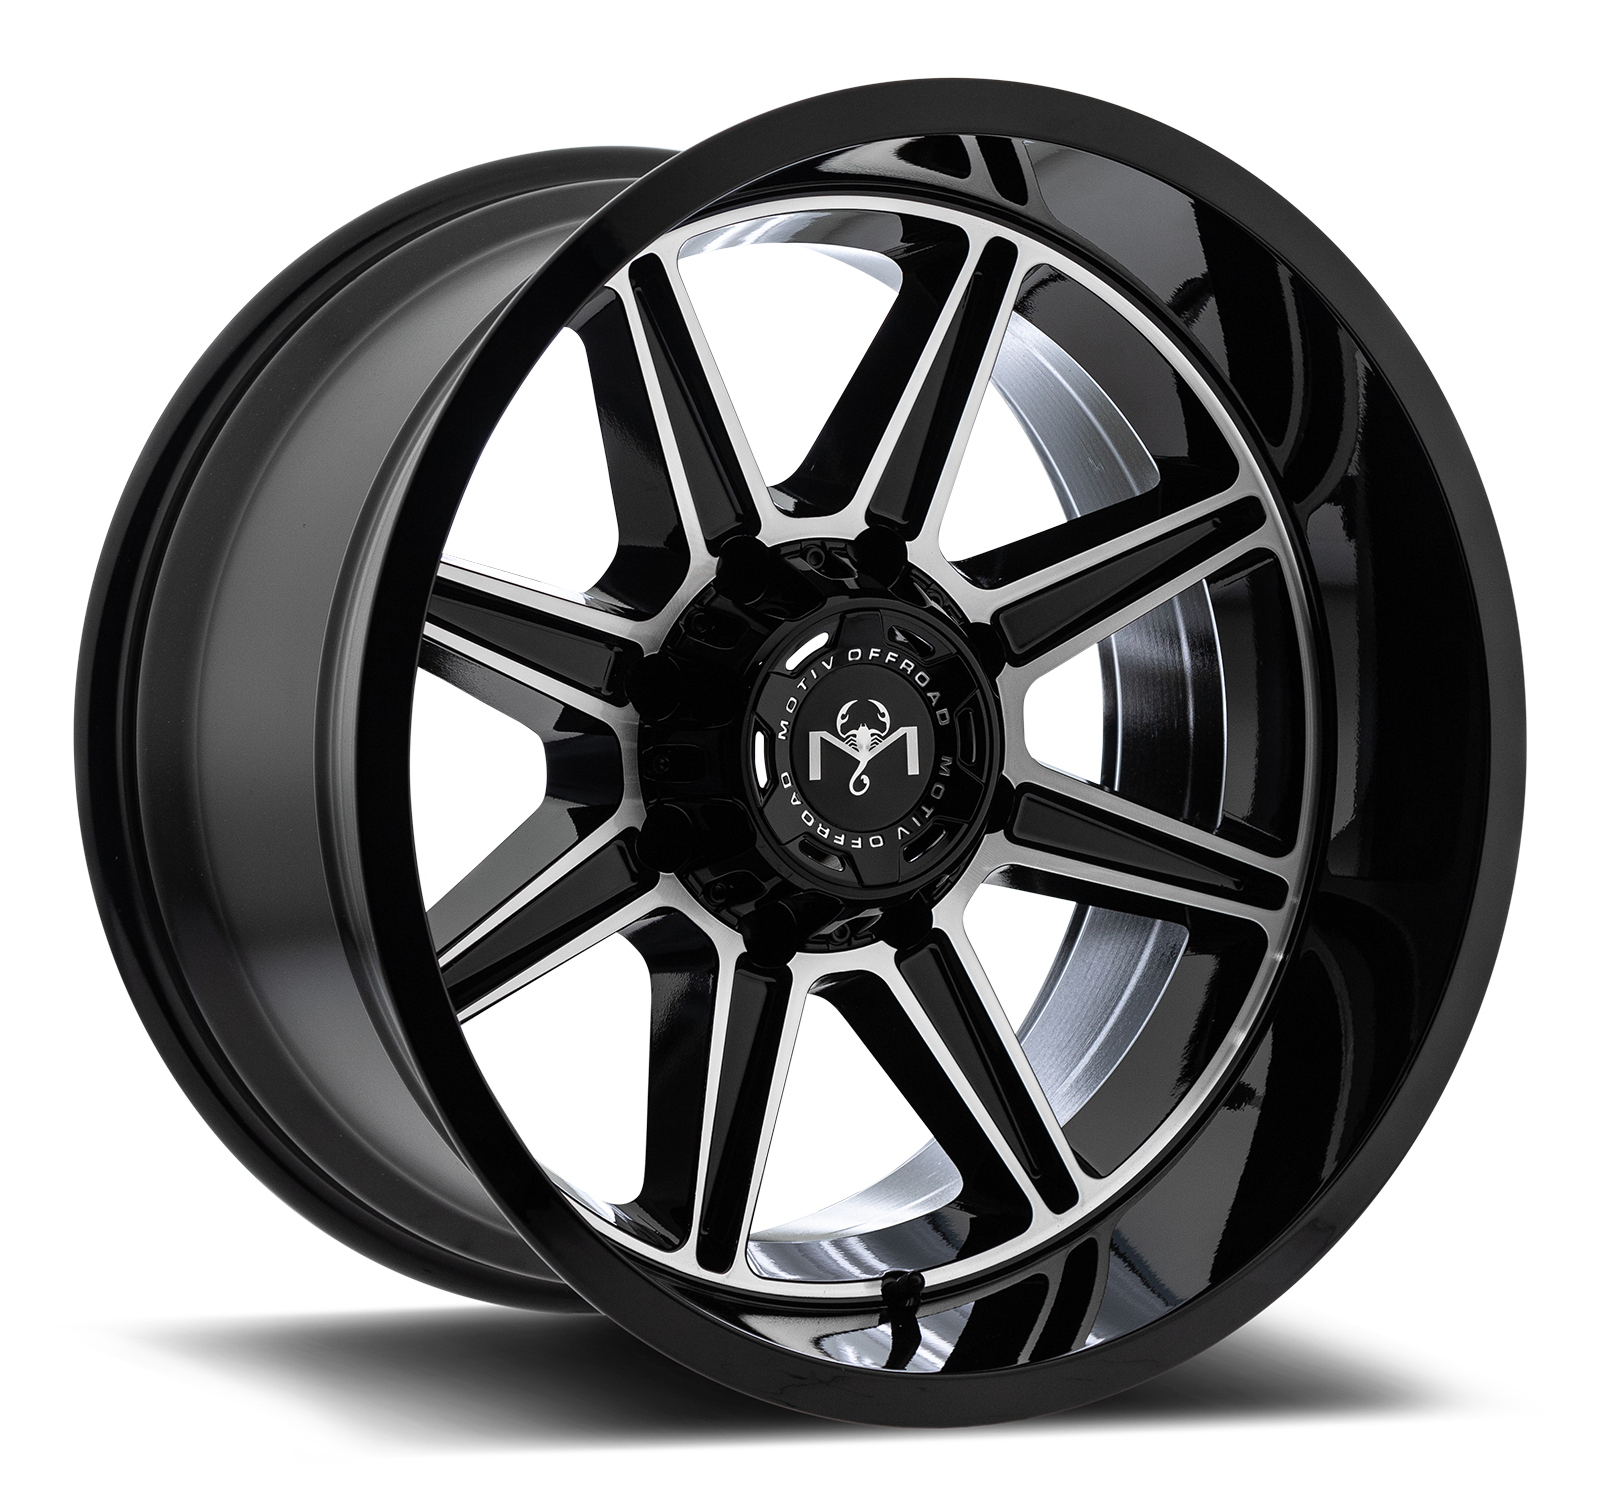 Motiv Off Road BALAST 20X10 -12 8X6.50 Gloss Black With Machined Face Accents